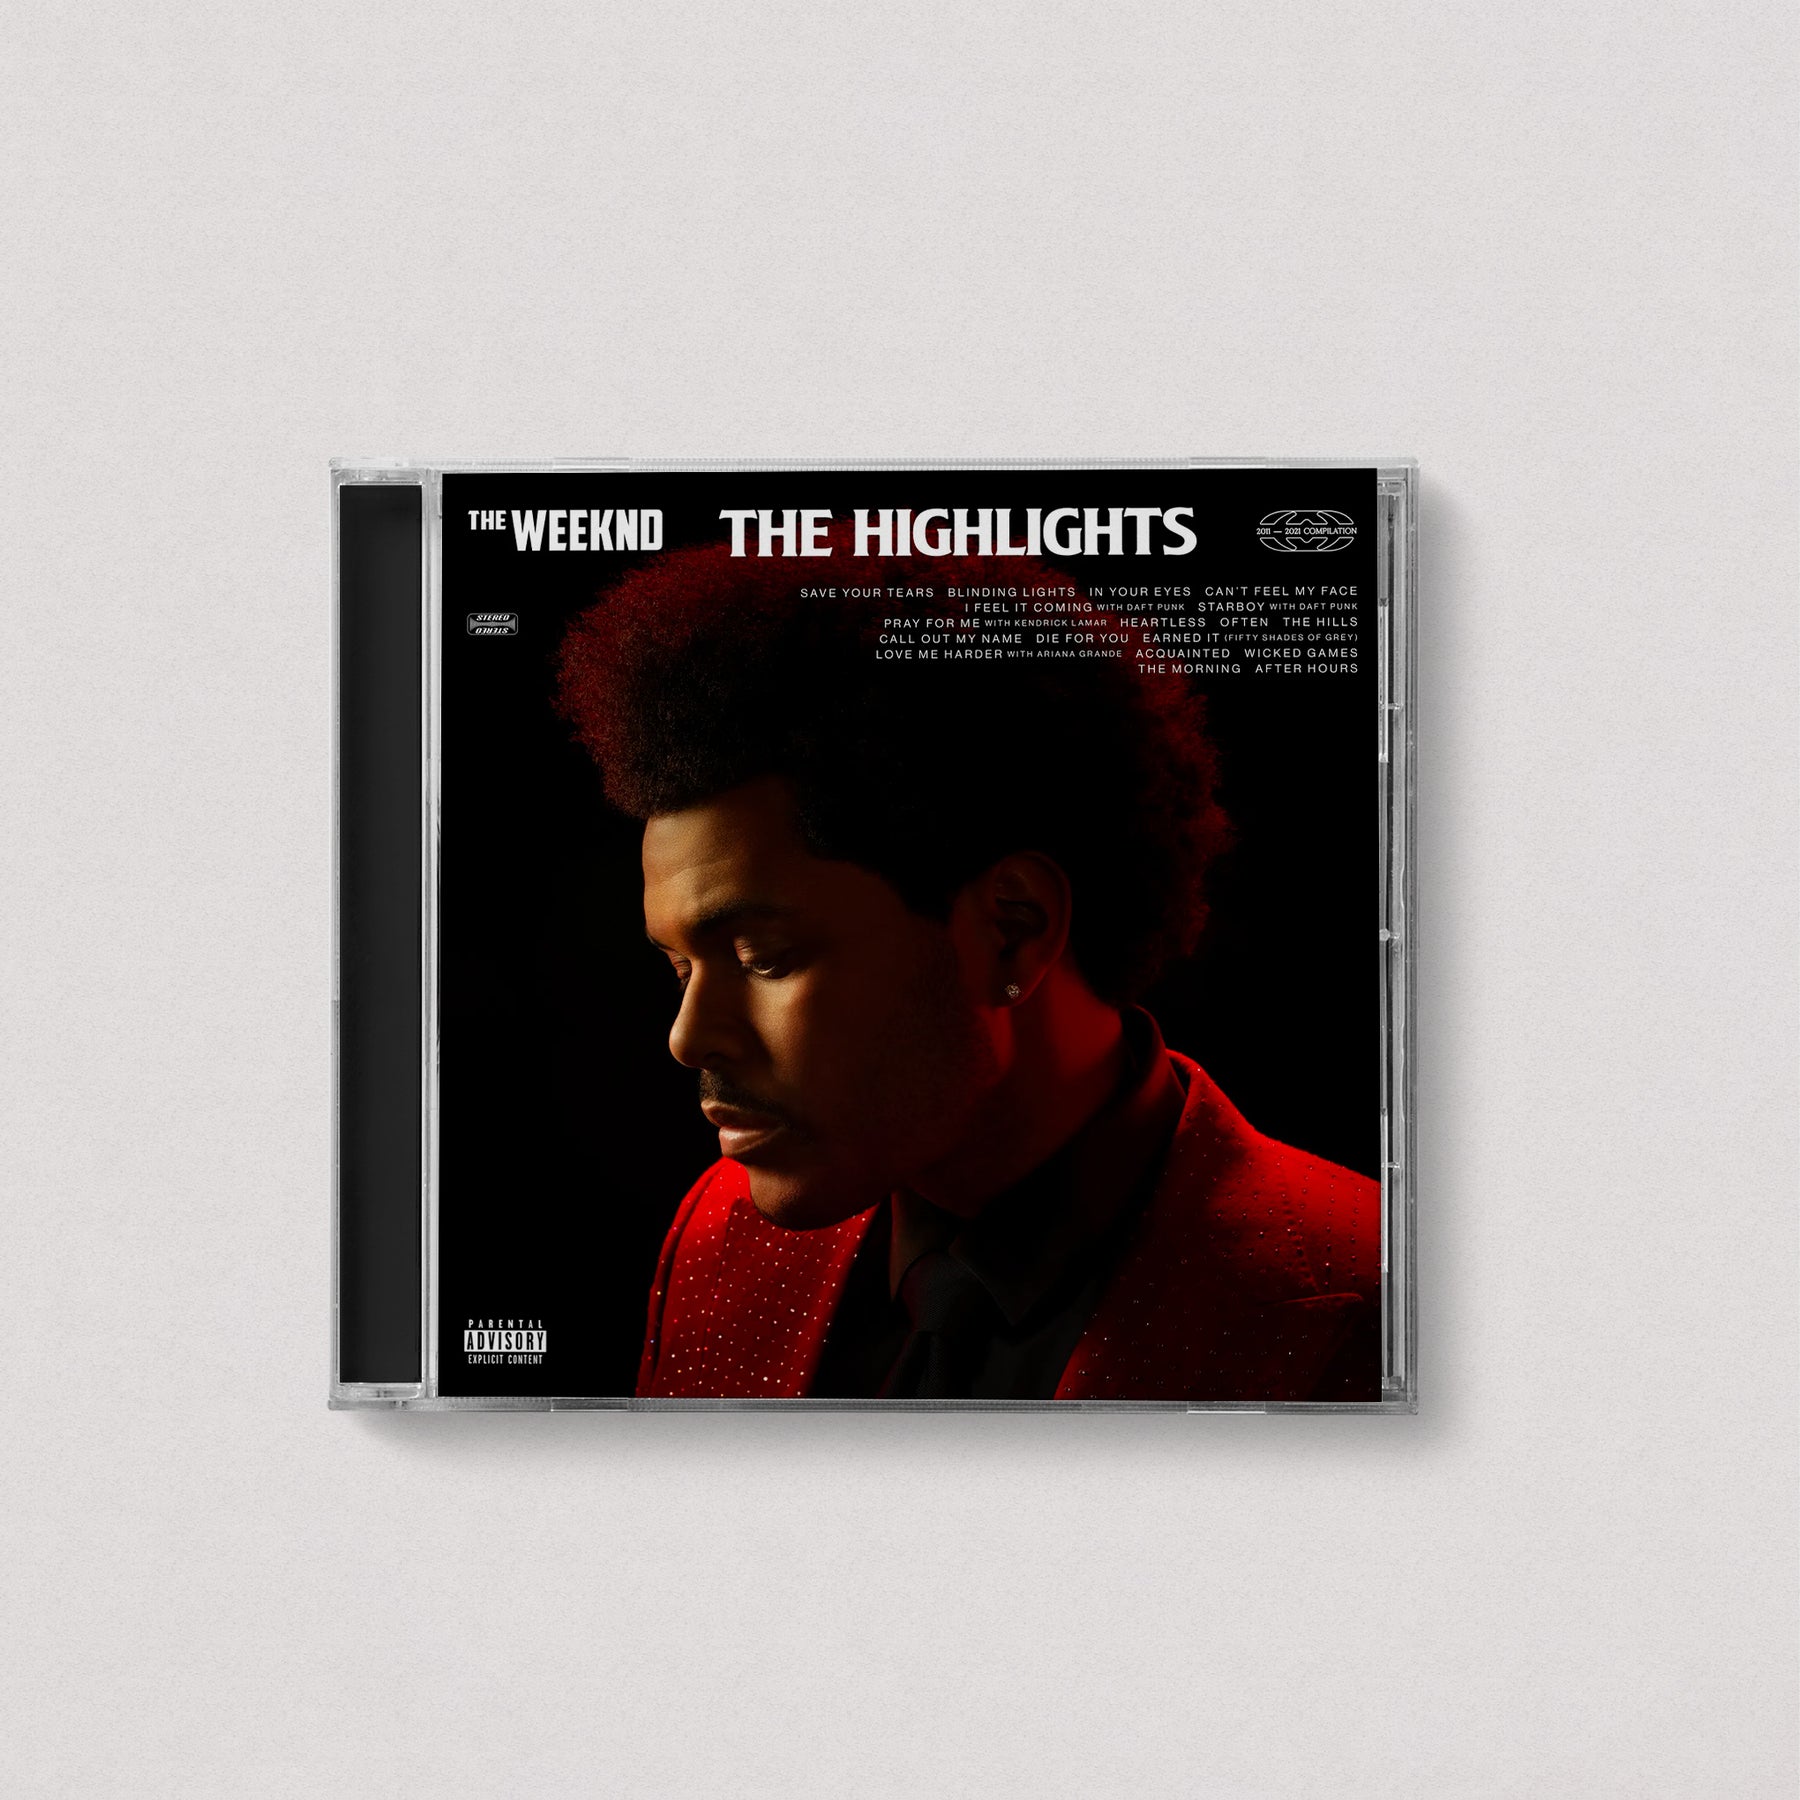 The Weeknd - The Highlights (Standard, CD)